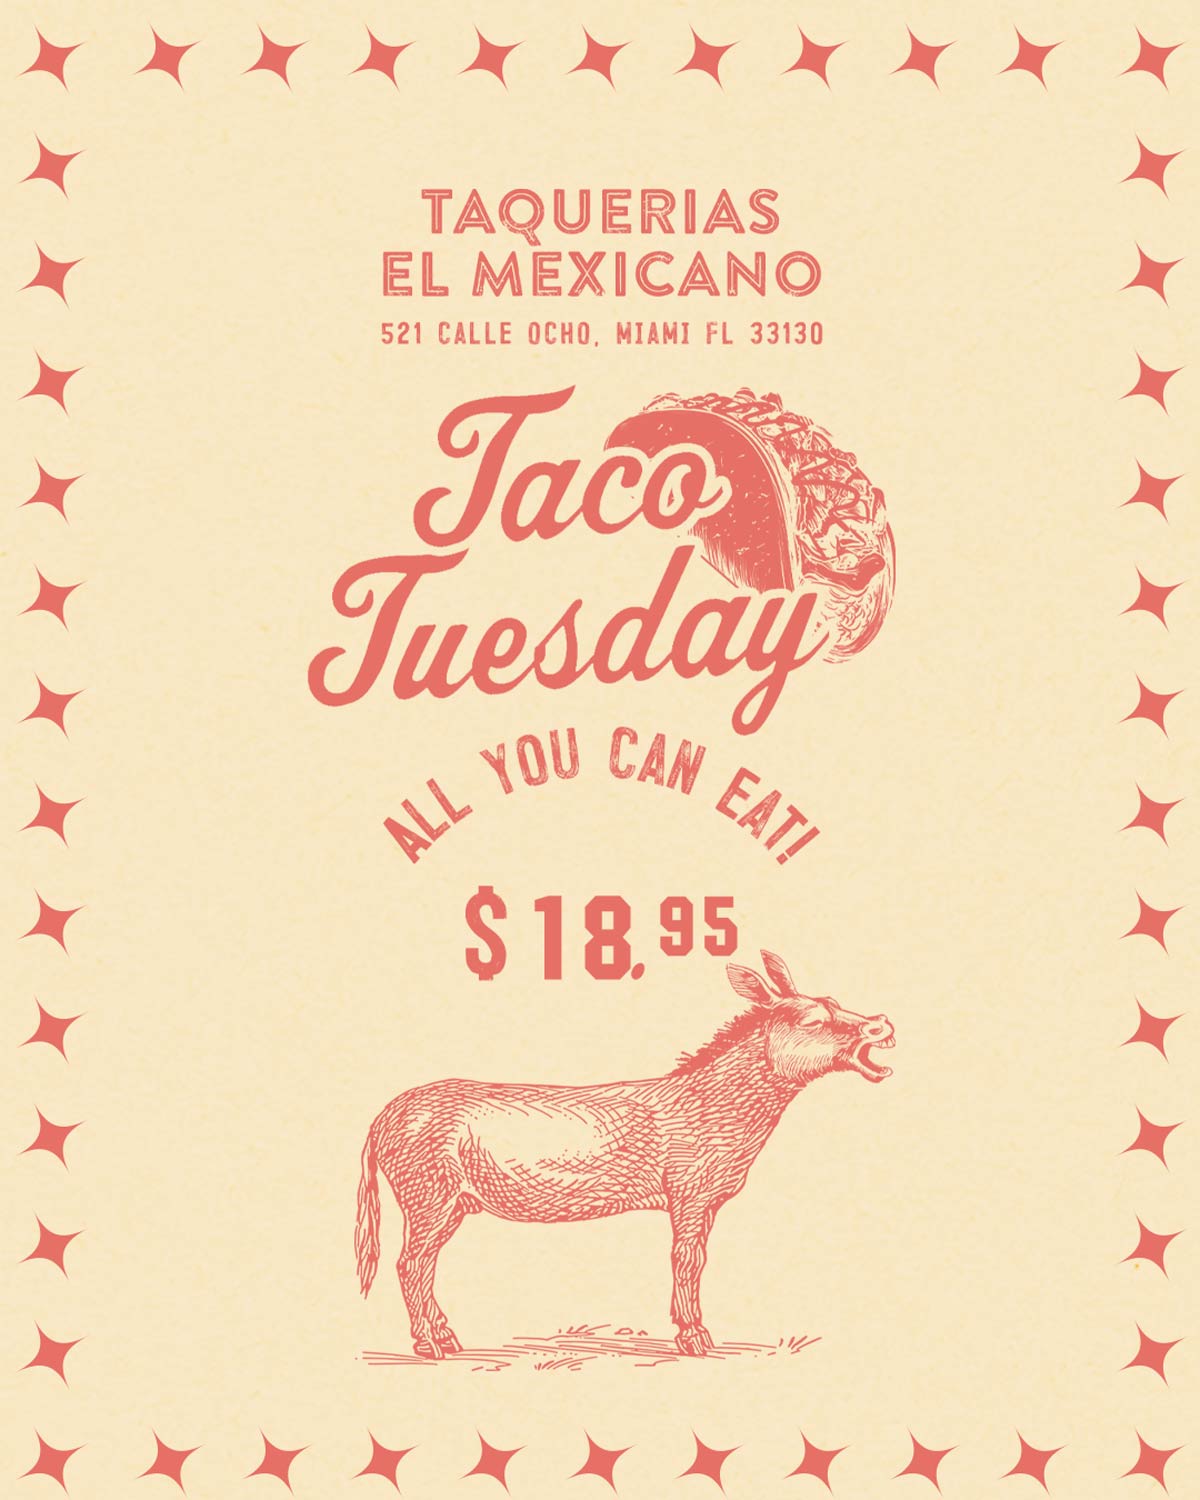 Taco Tuesday all you can eat for $18.95 at Taquerias el Mexicano